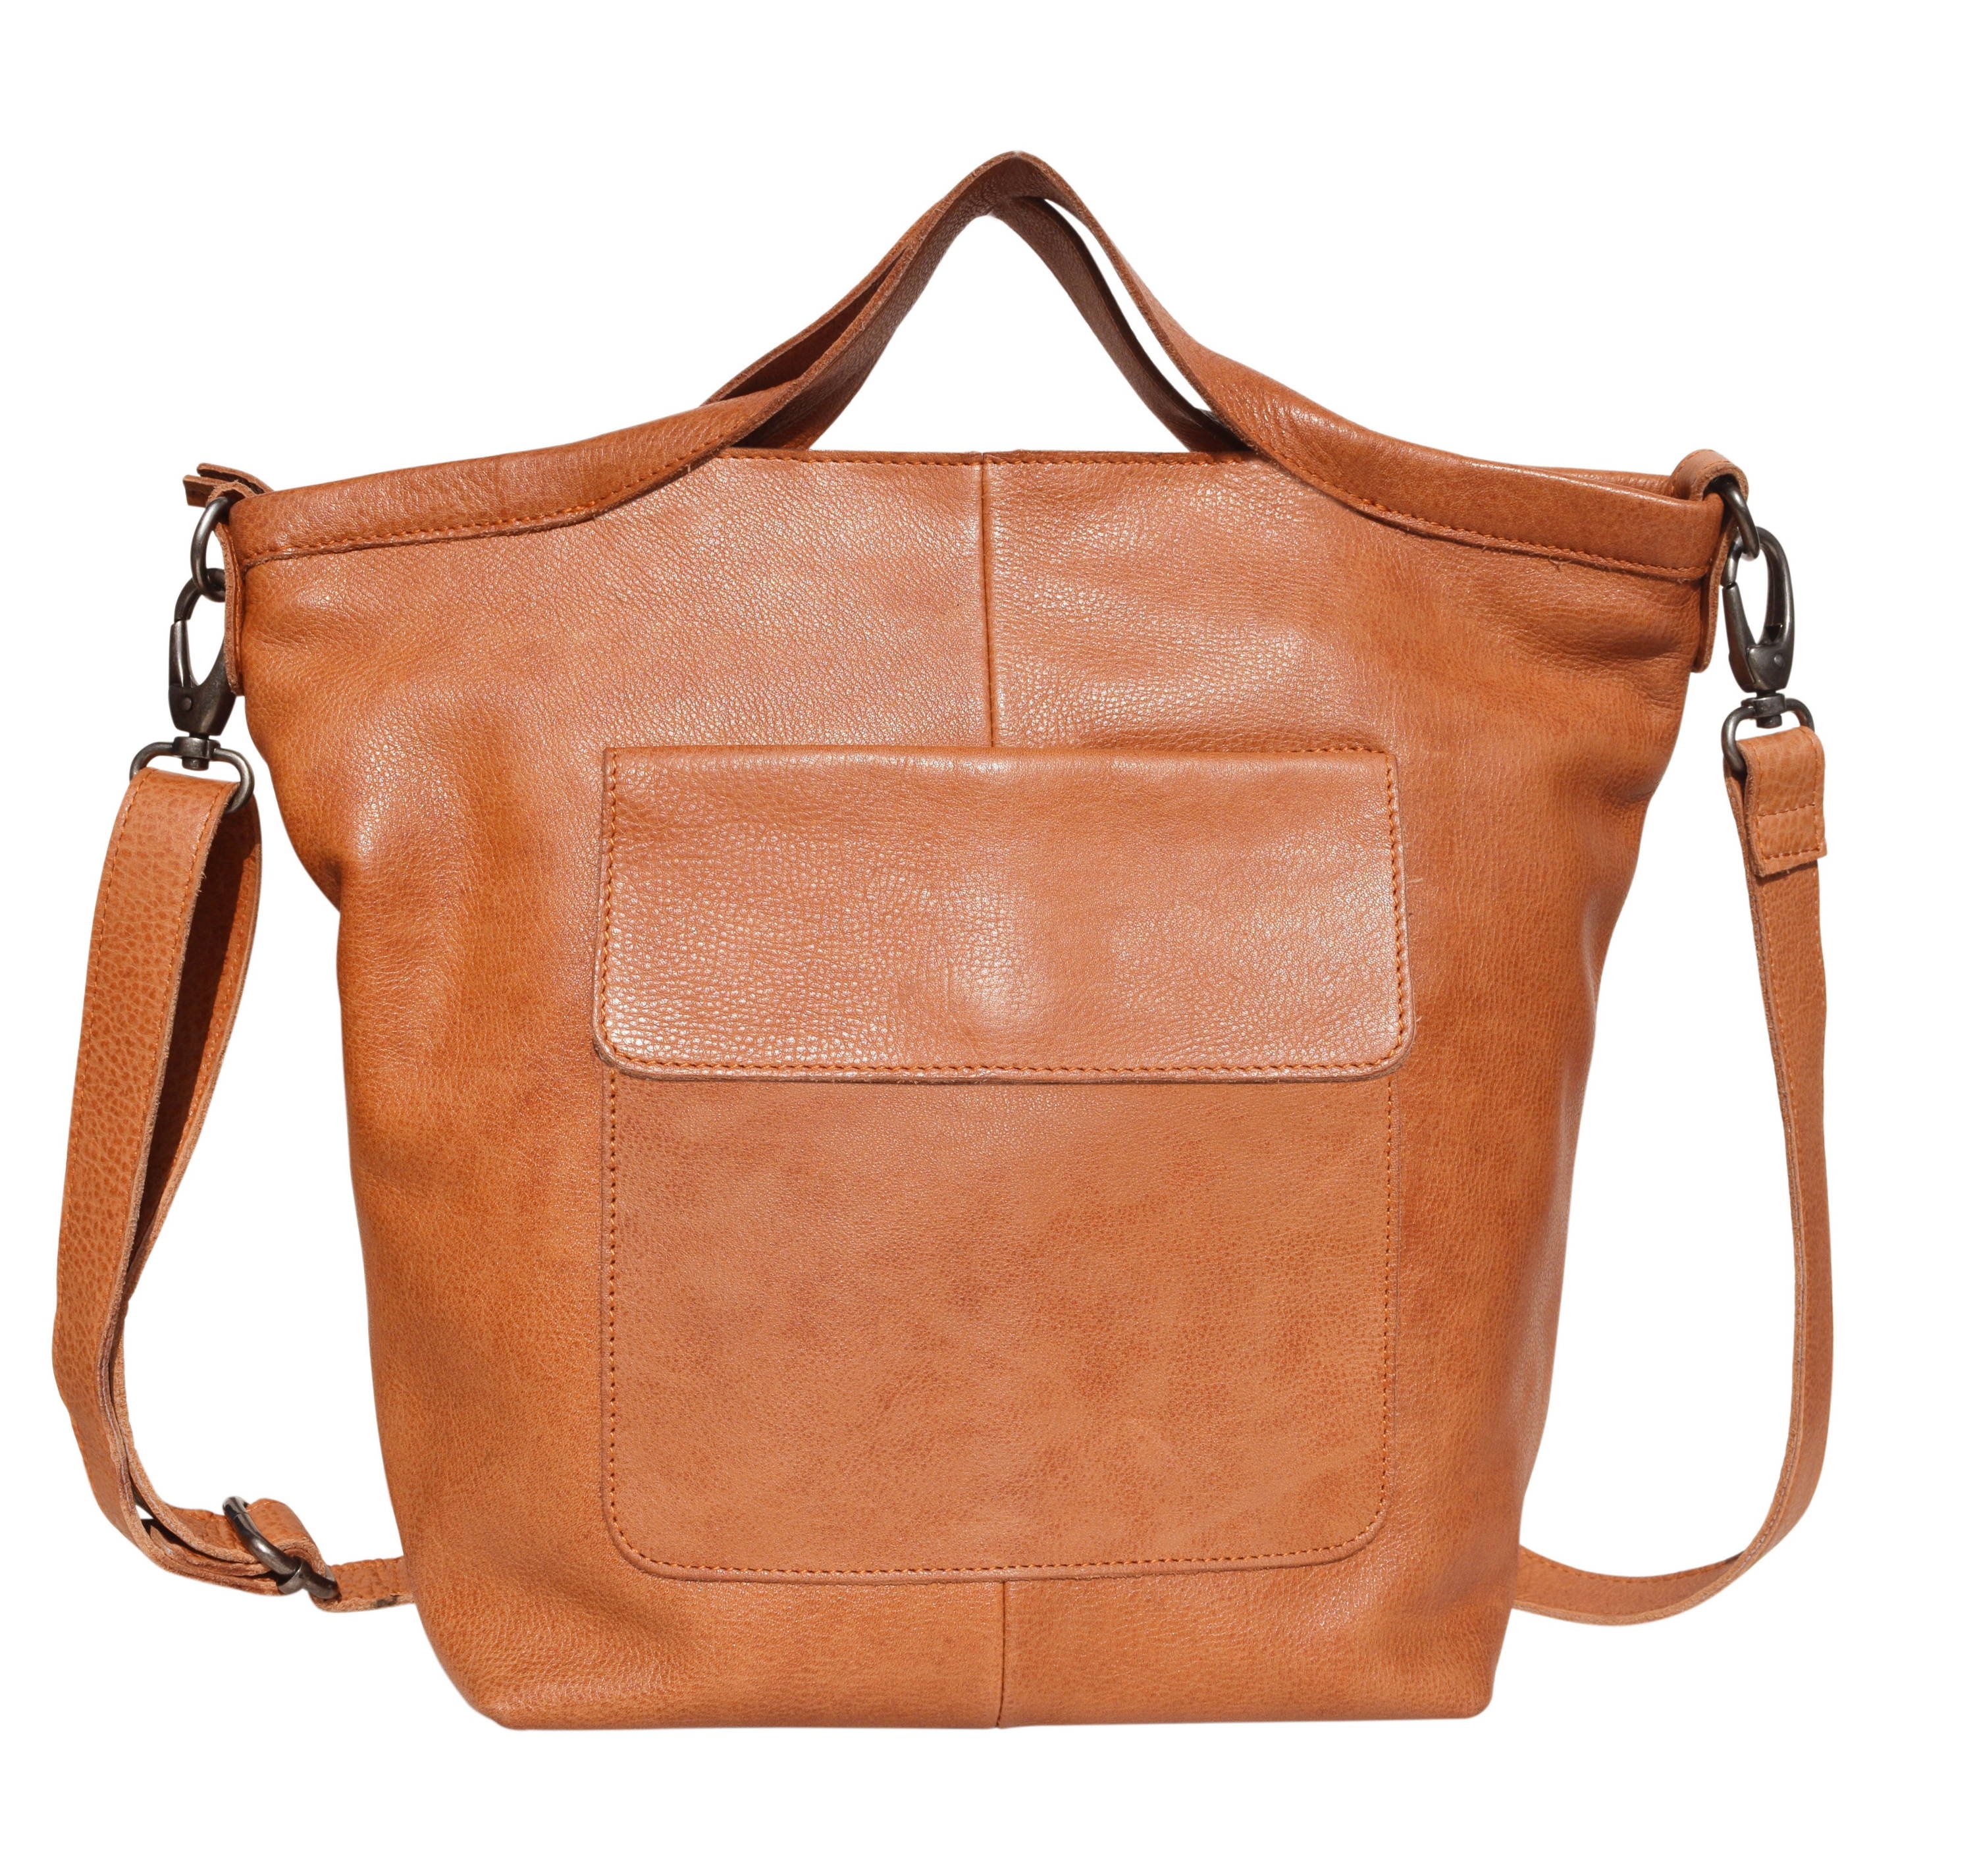 Multi-functional, the Bianca can be worn hand-held or with a strap. In addition to its versatility, the Bianca is made with buttery-soft leather.